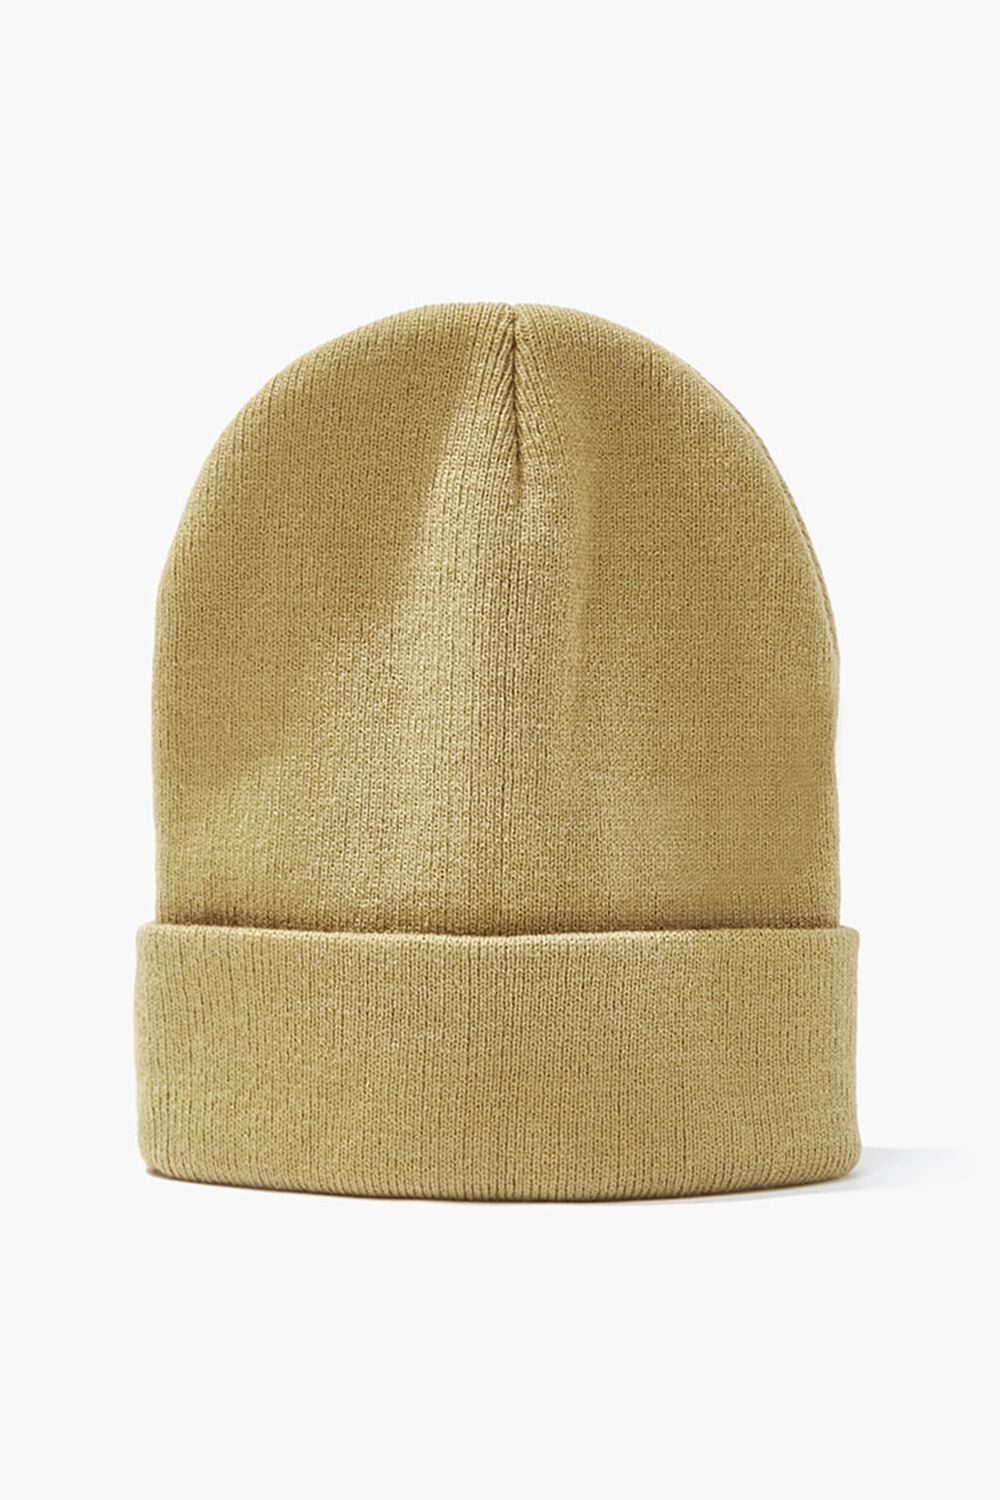 TAUPE Foldover Knit Beanie, image 1